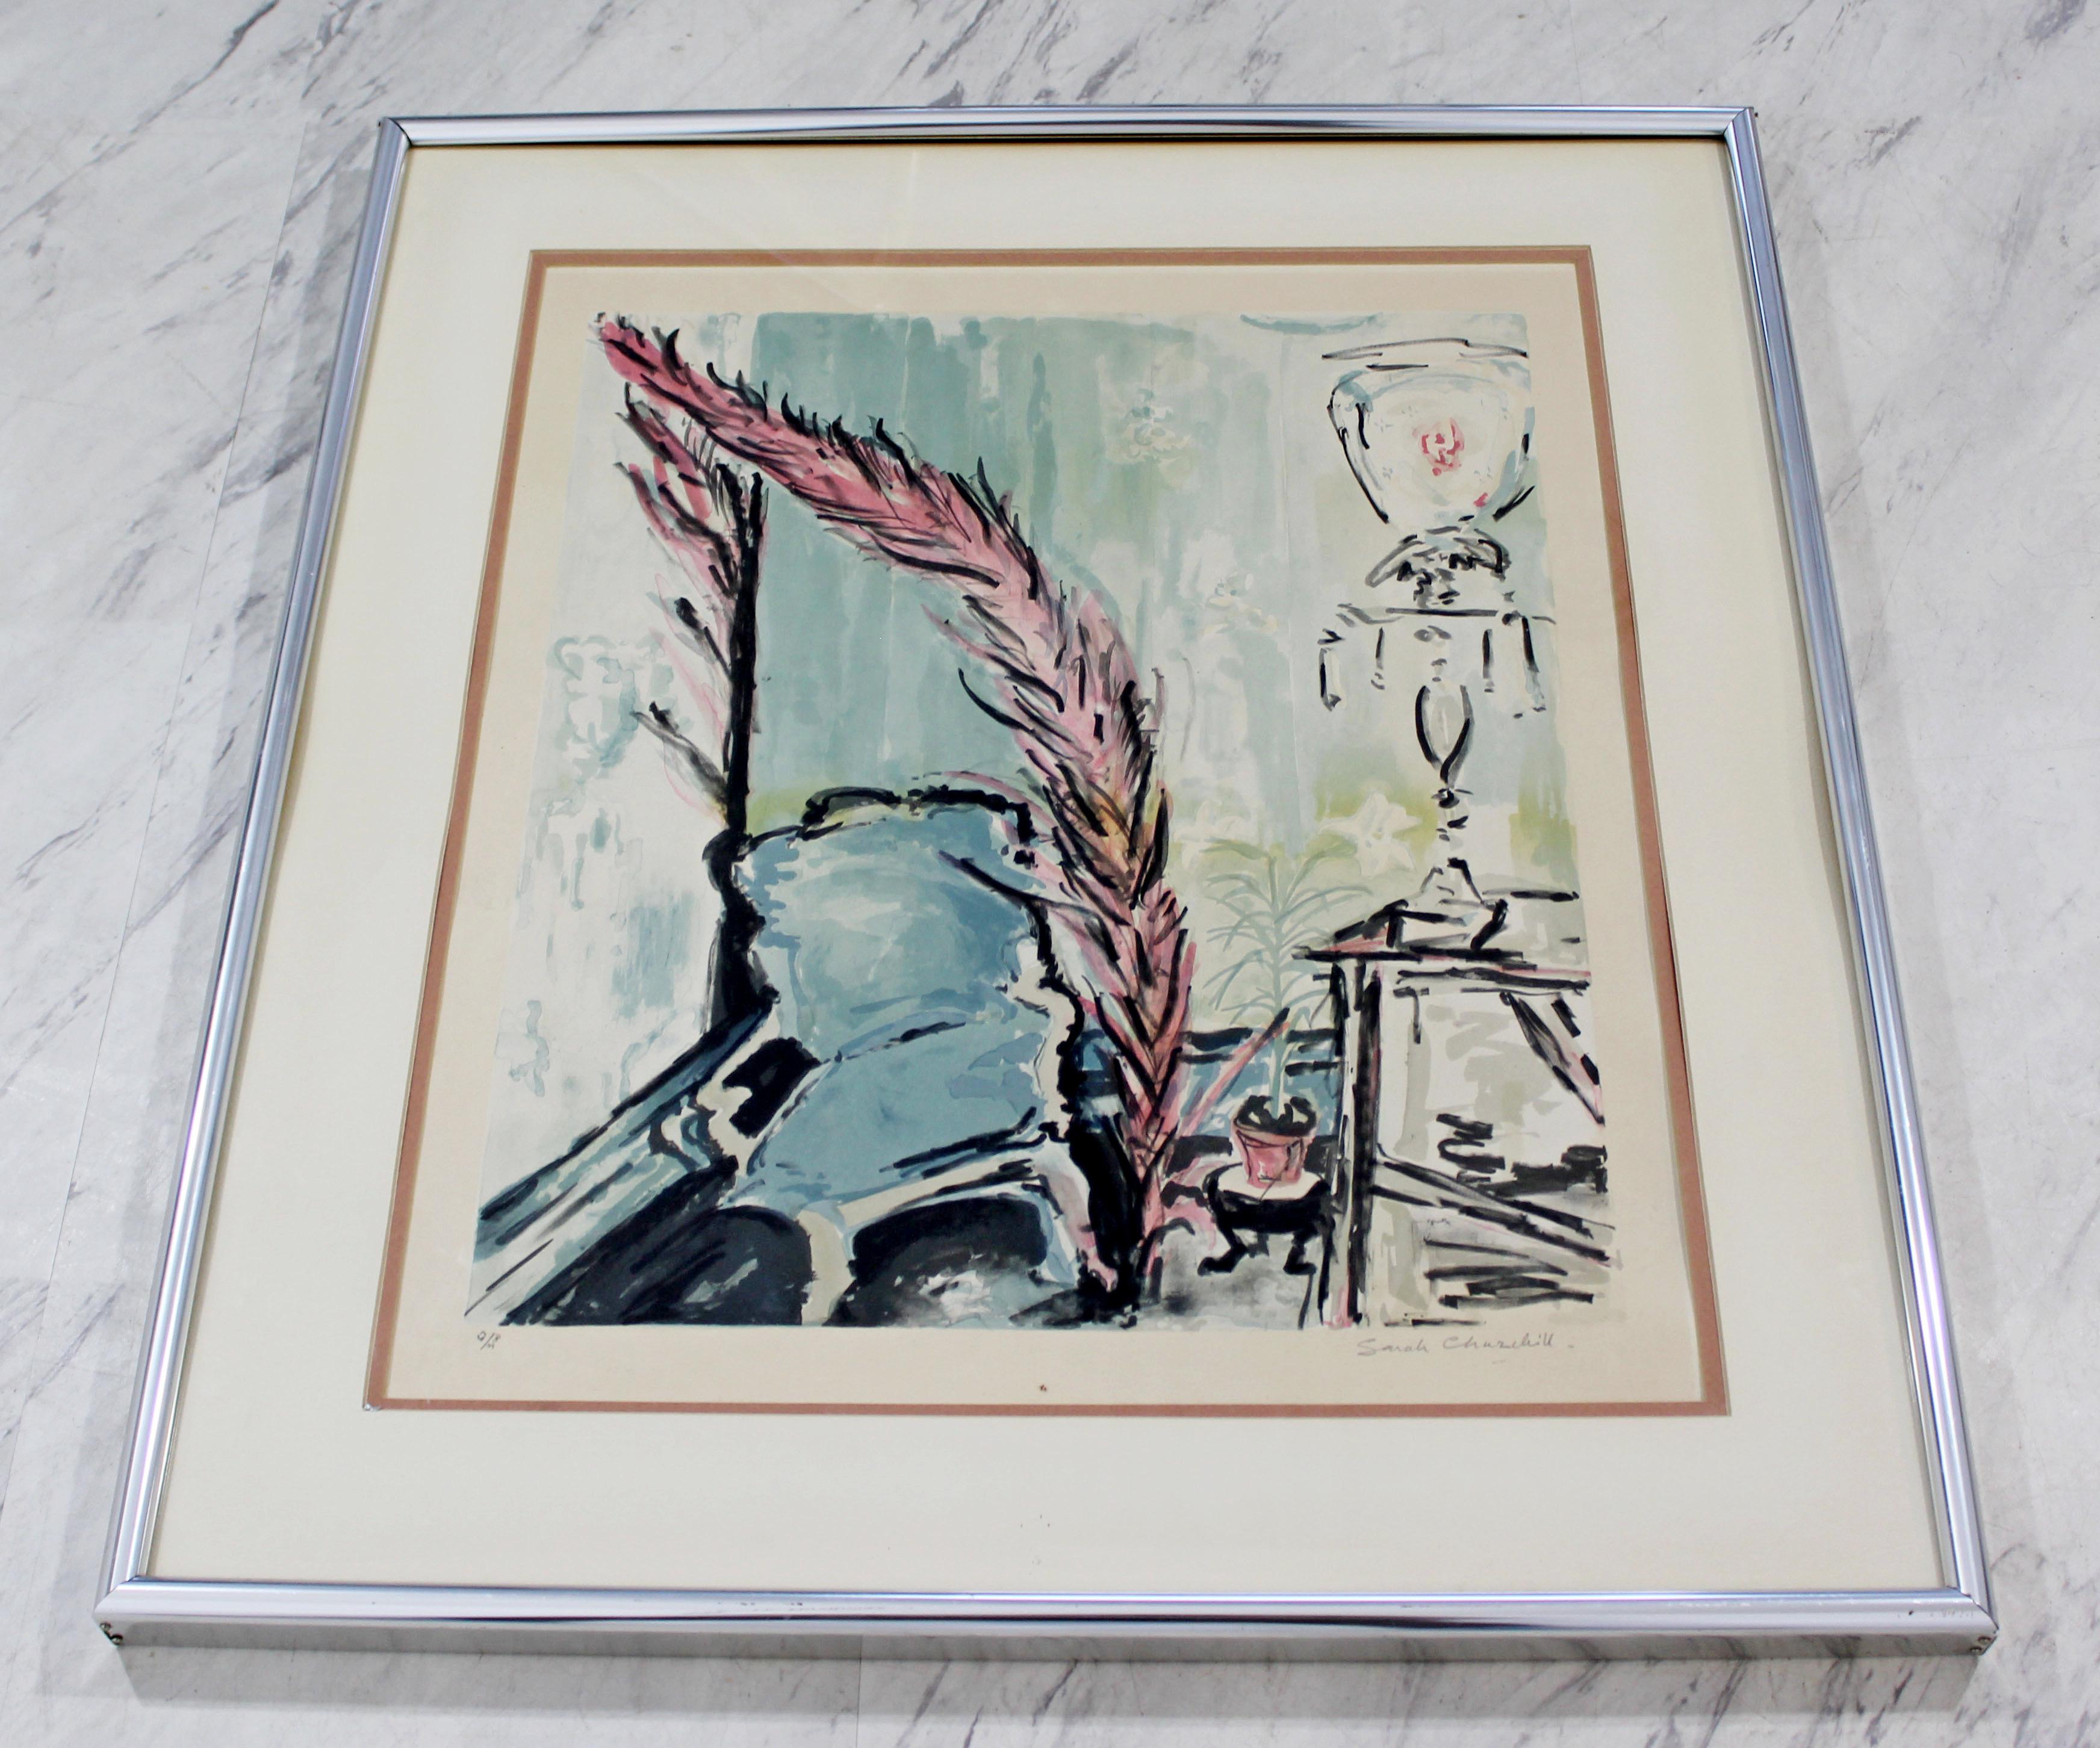 For your consideration is a beautiful, chrome framed lithograph, signed and numbered by Sarah Churchill (daughter of Winston Churchill) 67/300. In very good condition, with some dirt under the glass. The dimensions of the frame are 25